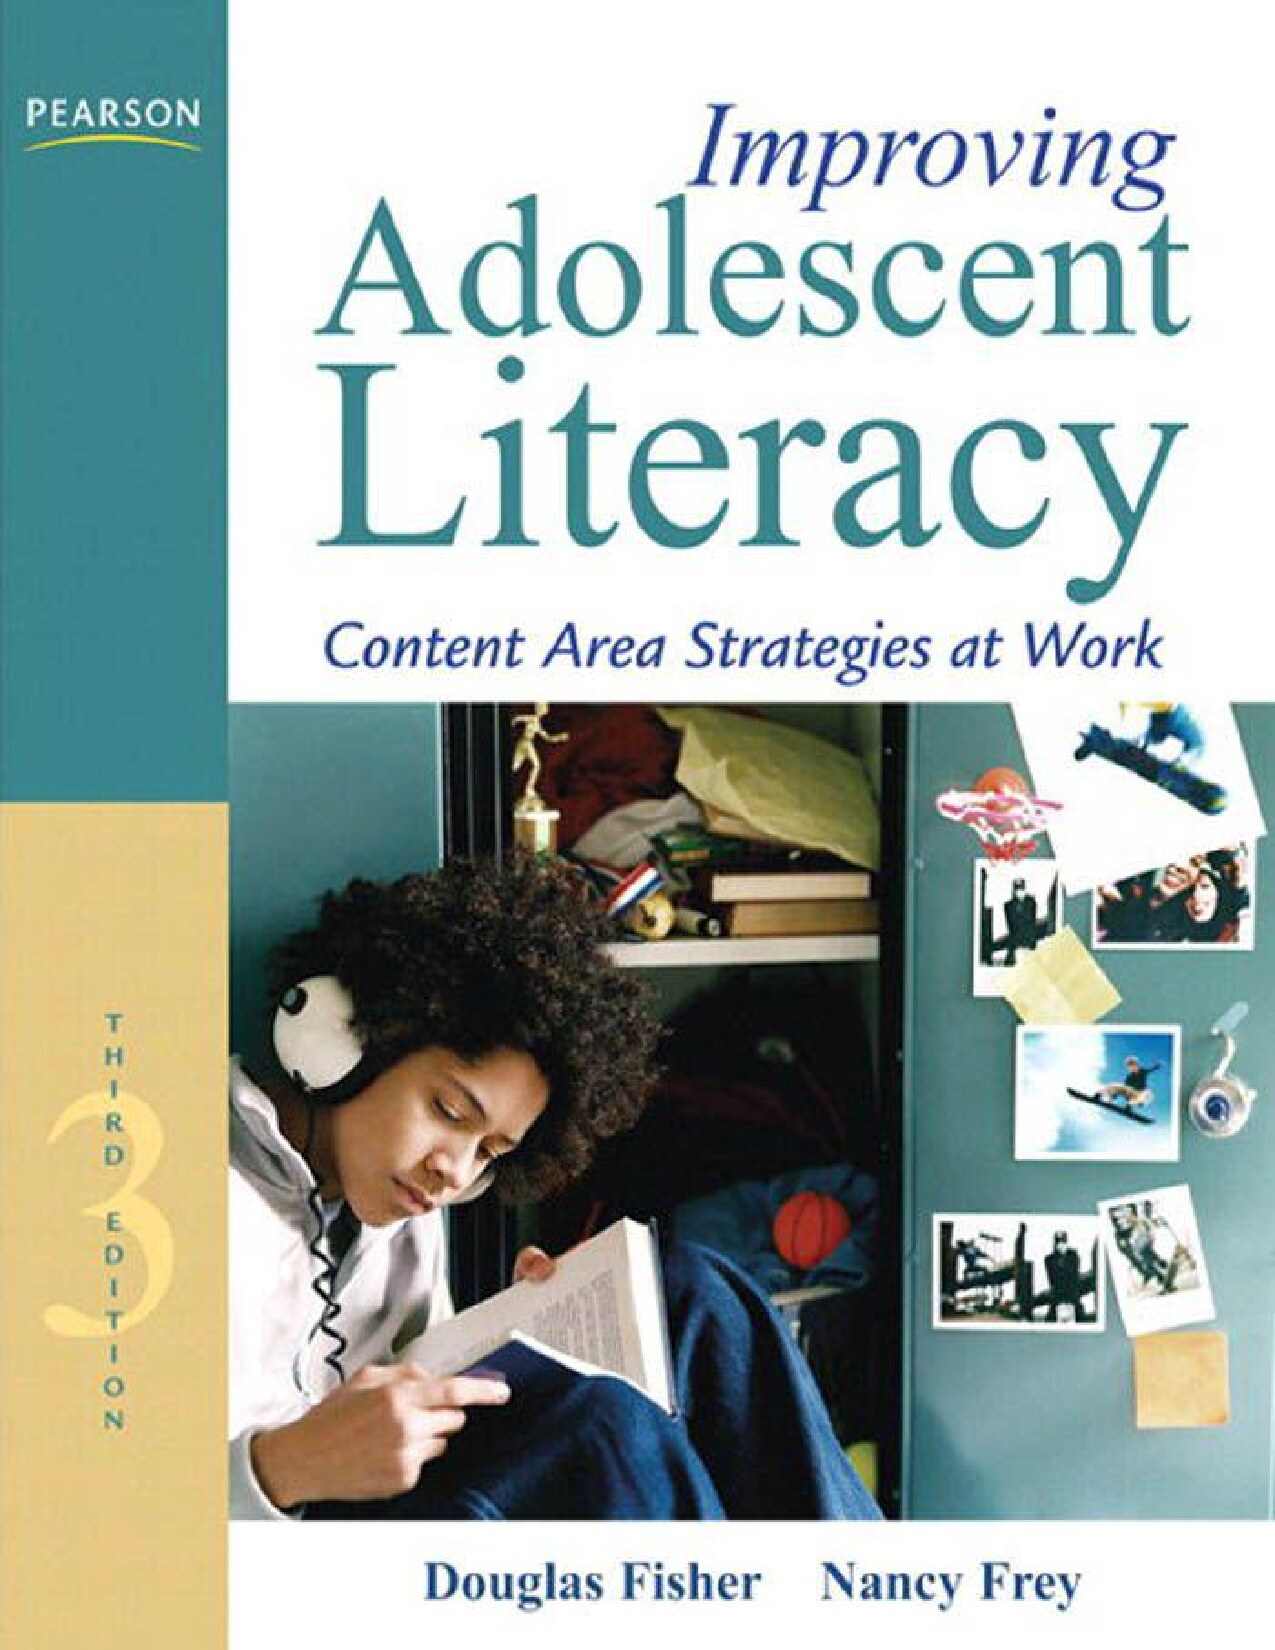 Improving Adolescent Literacy: Content Area Strategies at Work